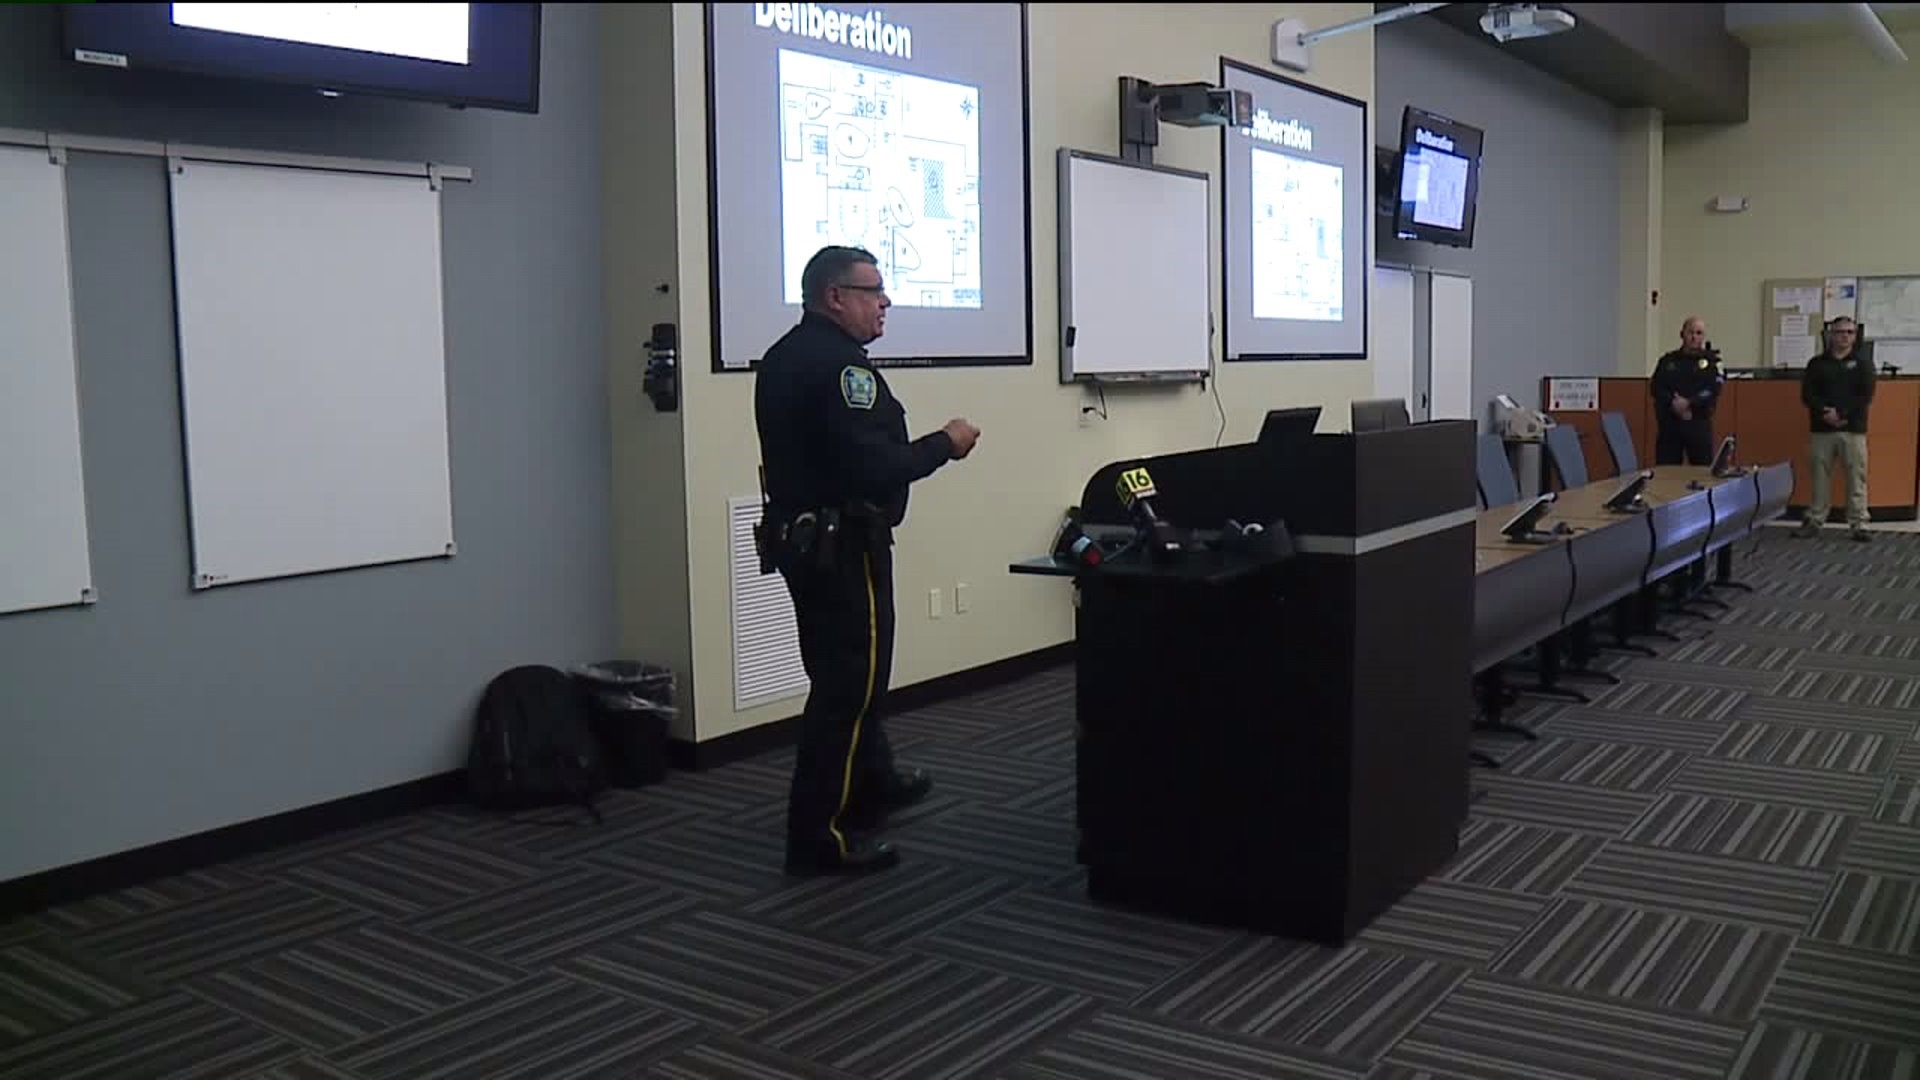 Active Shooter Seminar Comes Just Hours After California Shooting